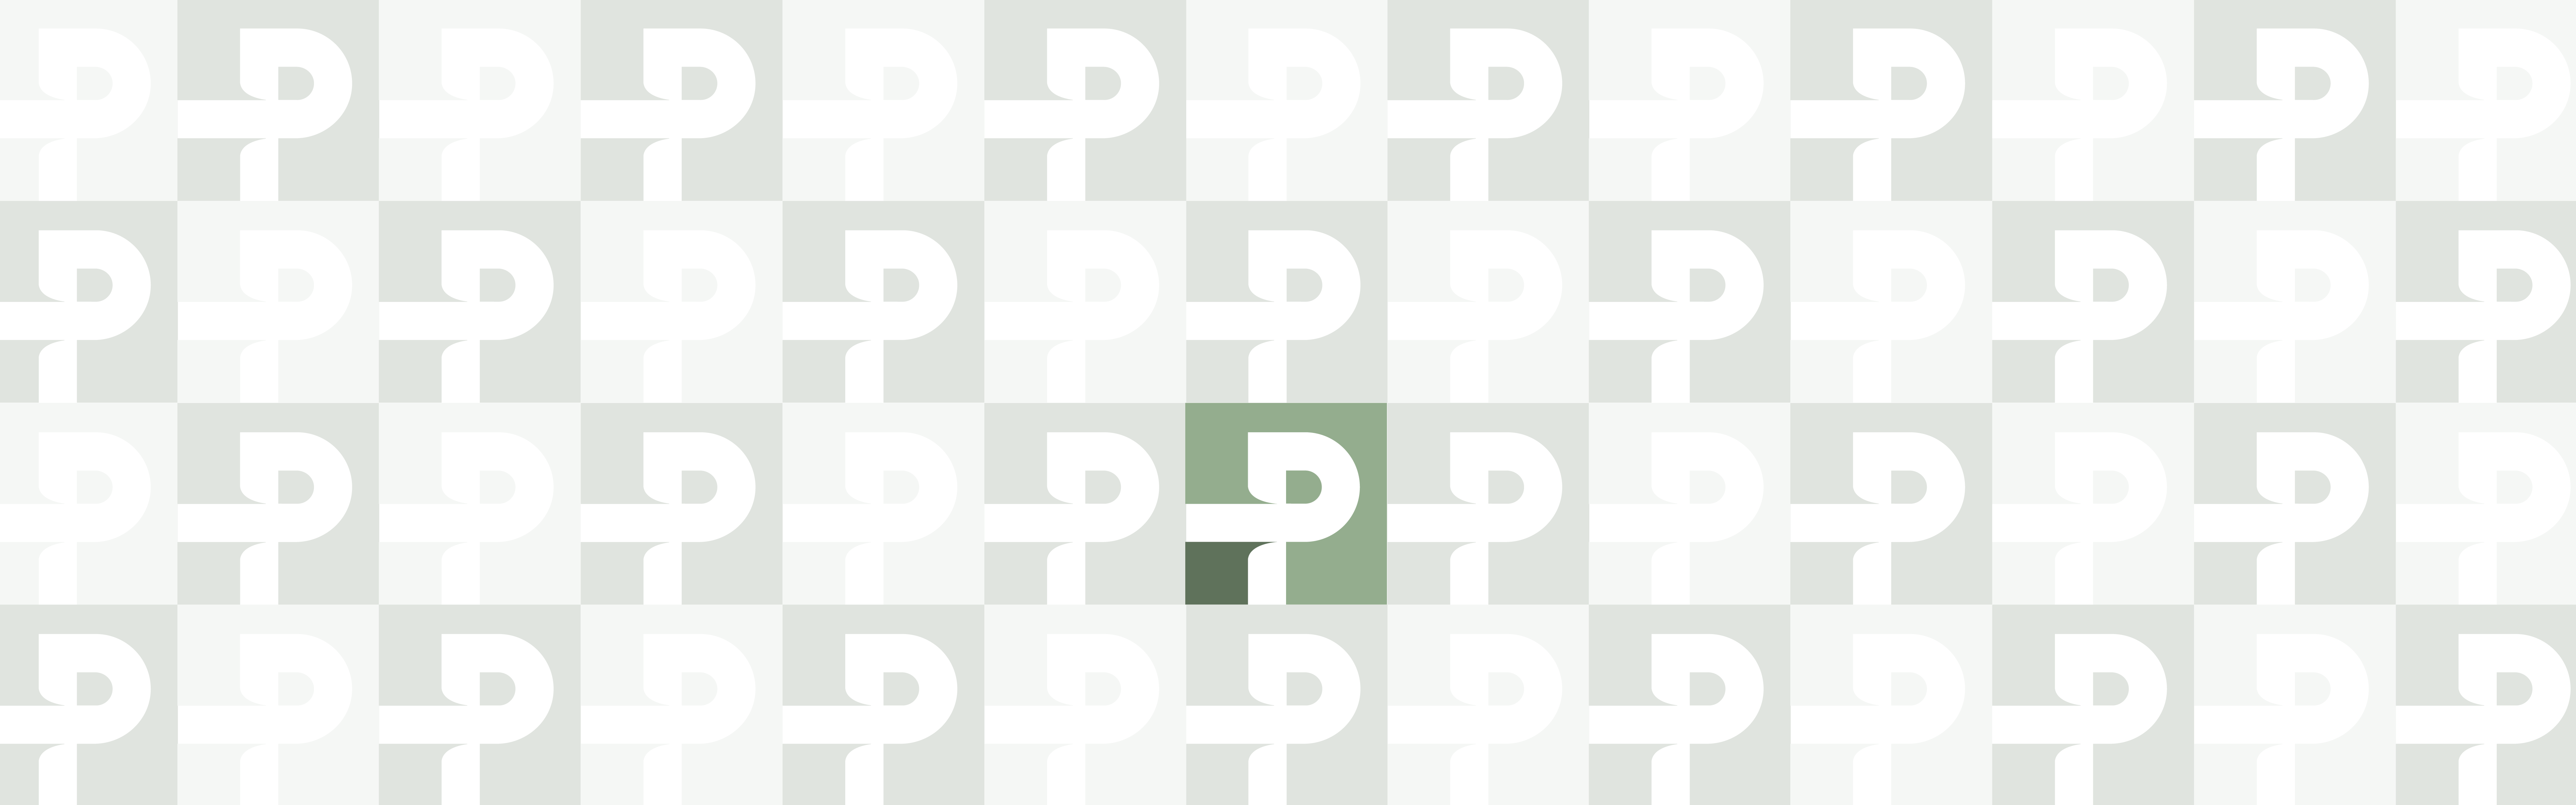 A pattern of white 'd' letters against a gray background, with one green 'd' standing out in the center, representing the Profero Team.